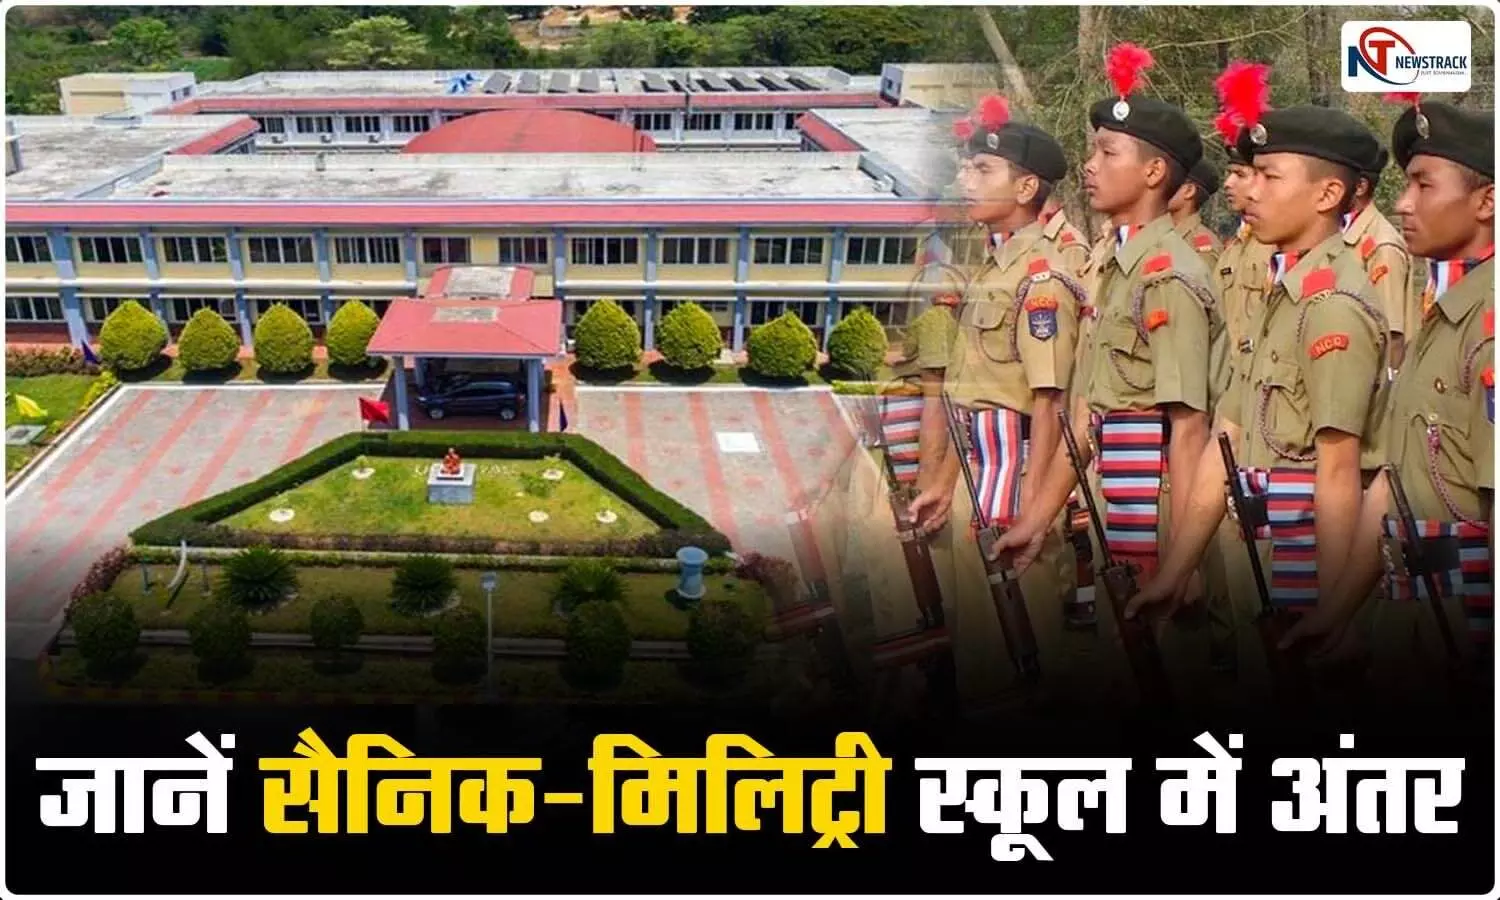 difference between Sainik and military school